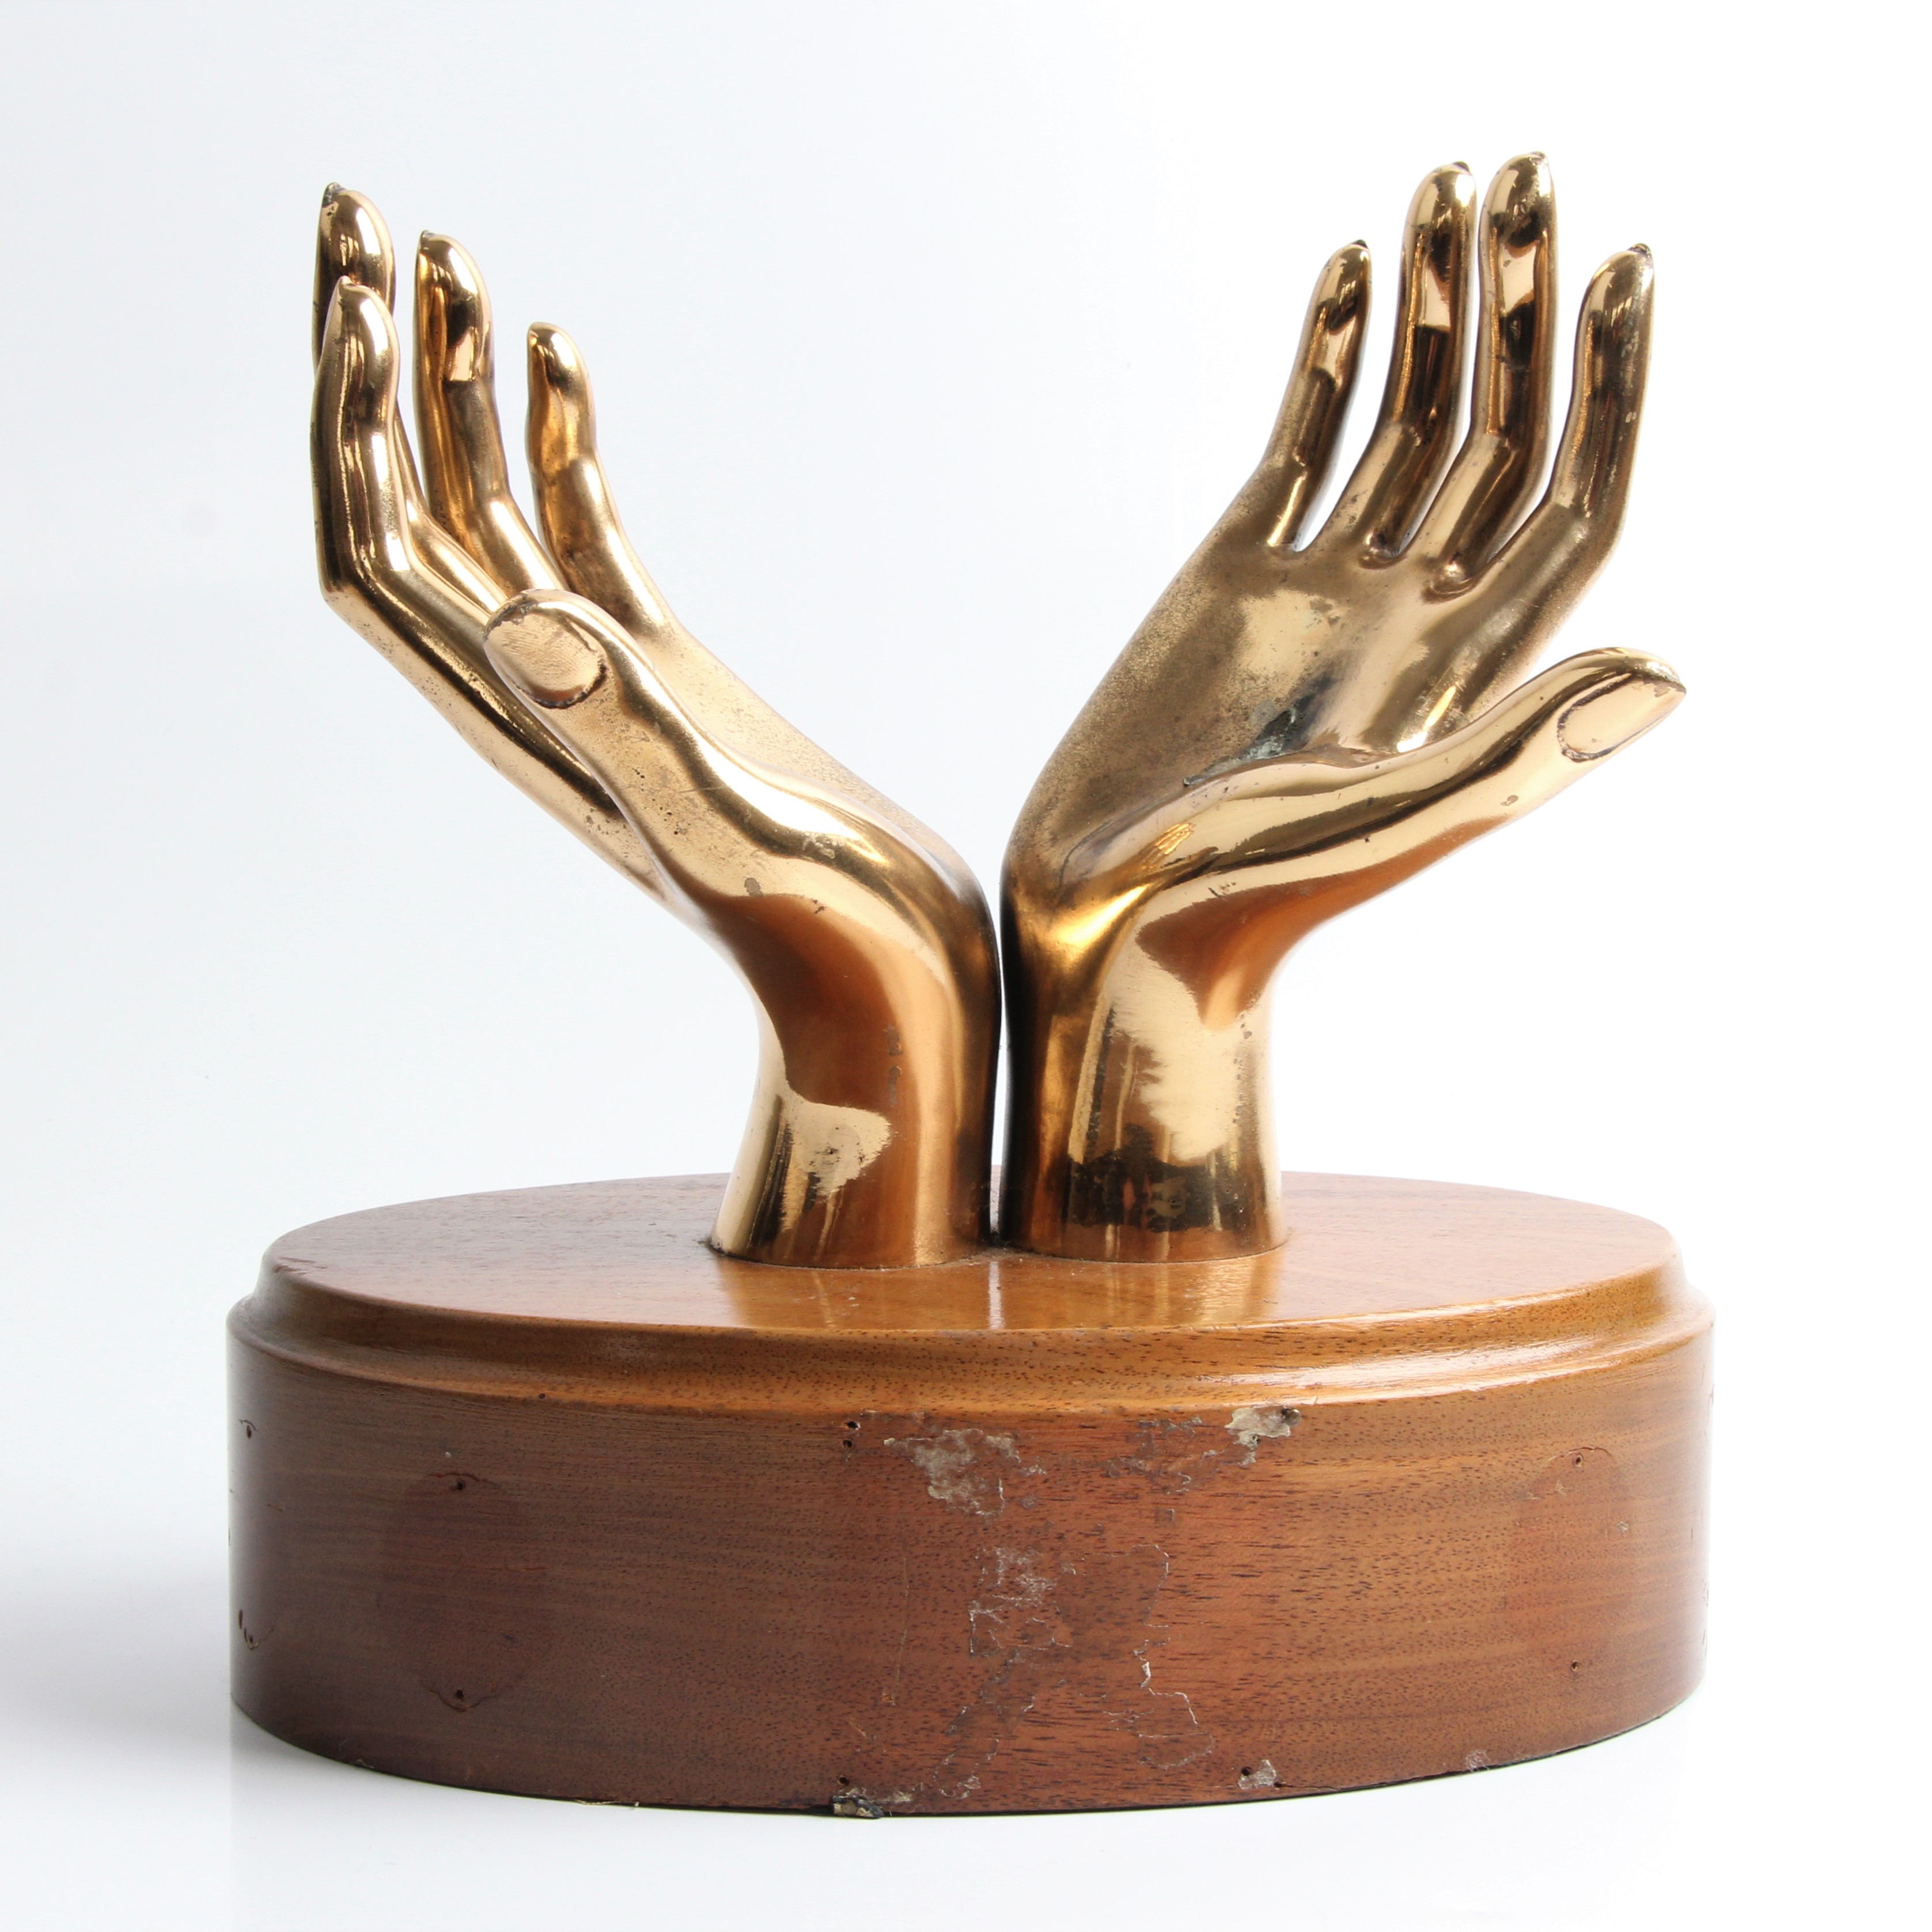 A brass trophy in the form of lifted hands, on wooden base, approx. height 25cm. IMPORTANT: Online